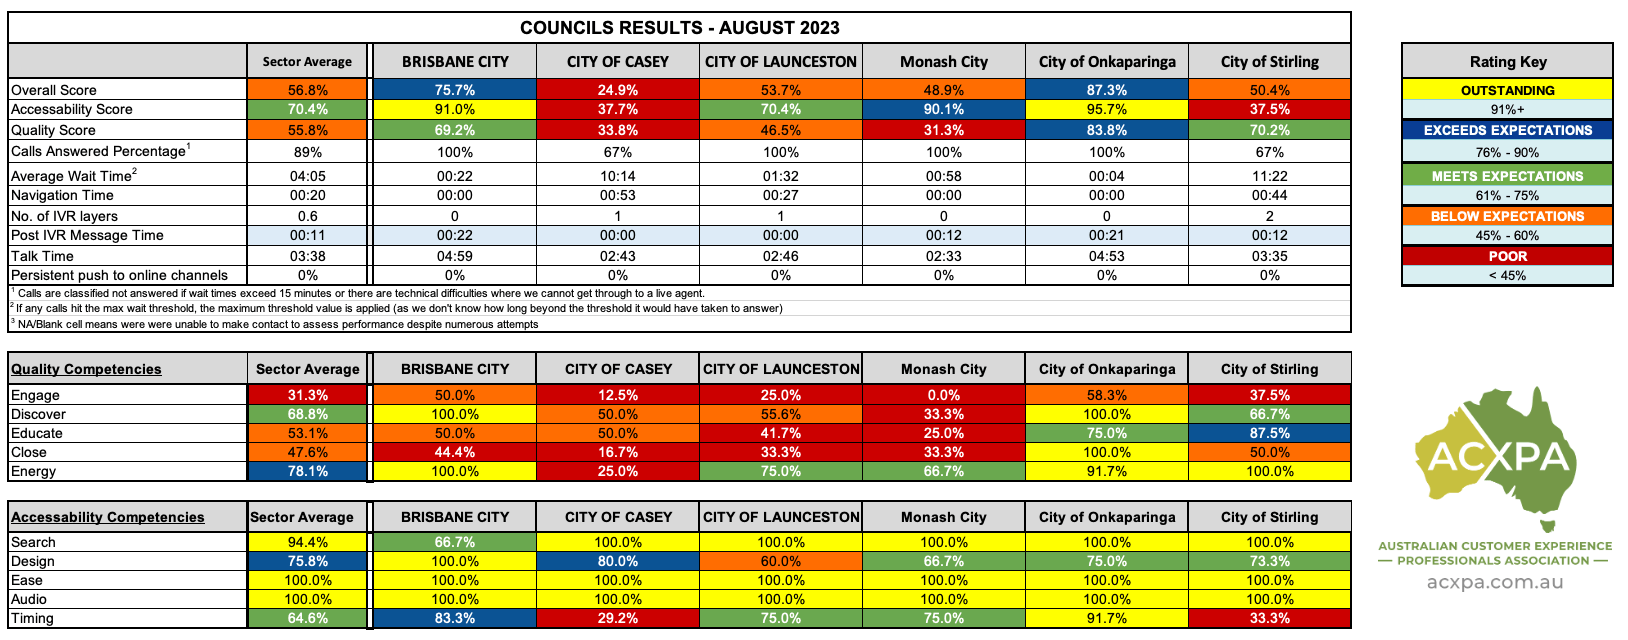 Australian Councils Summary Results August 2023